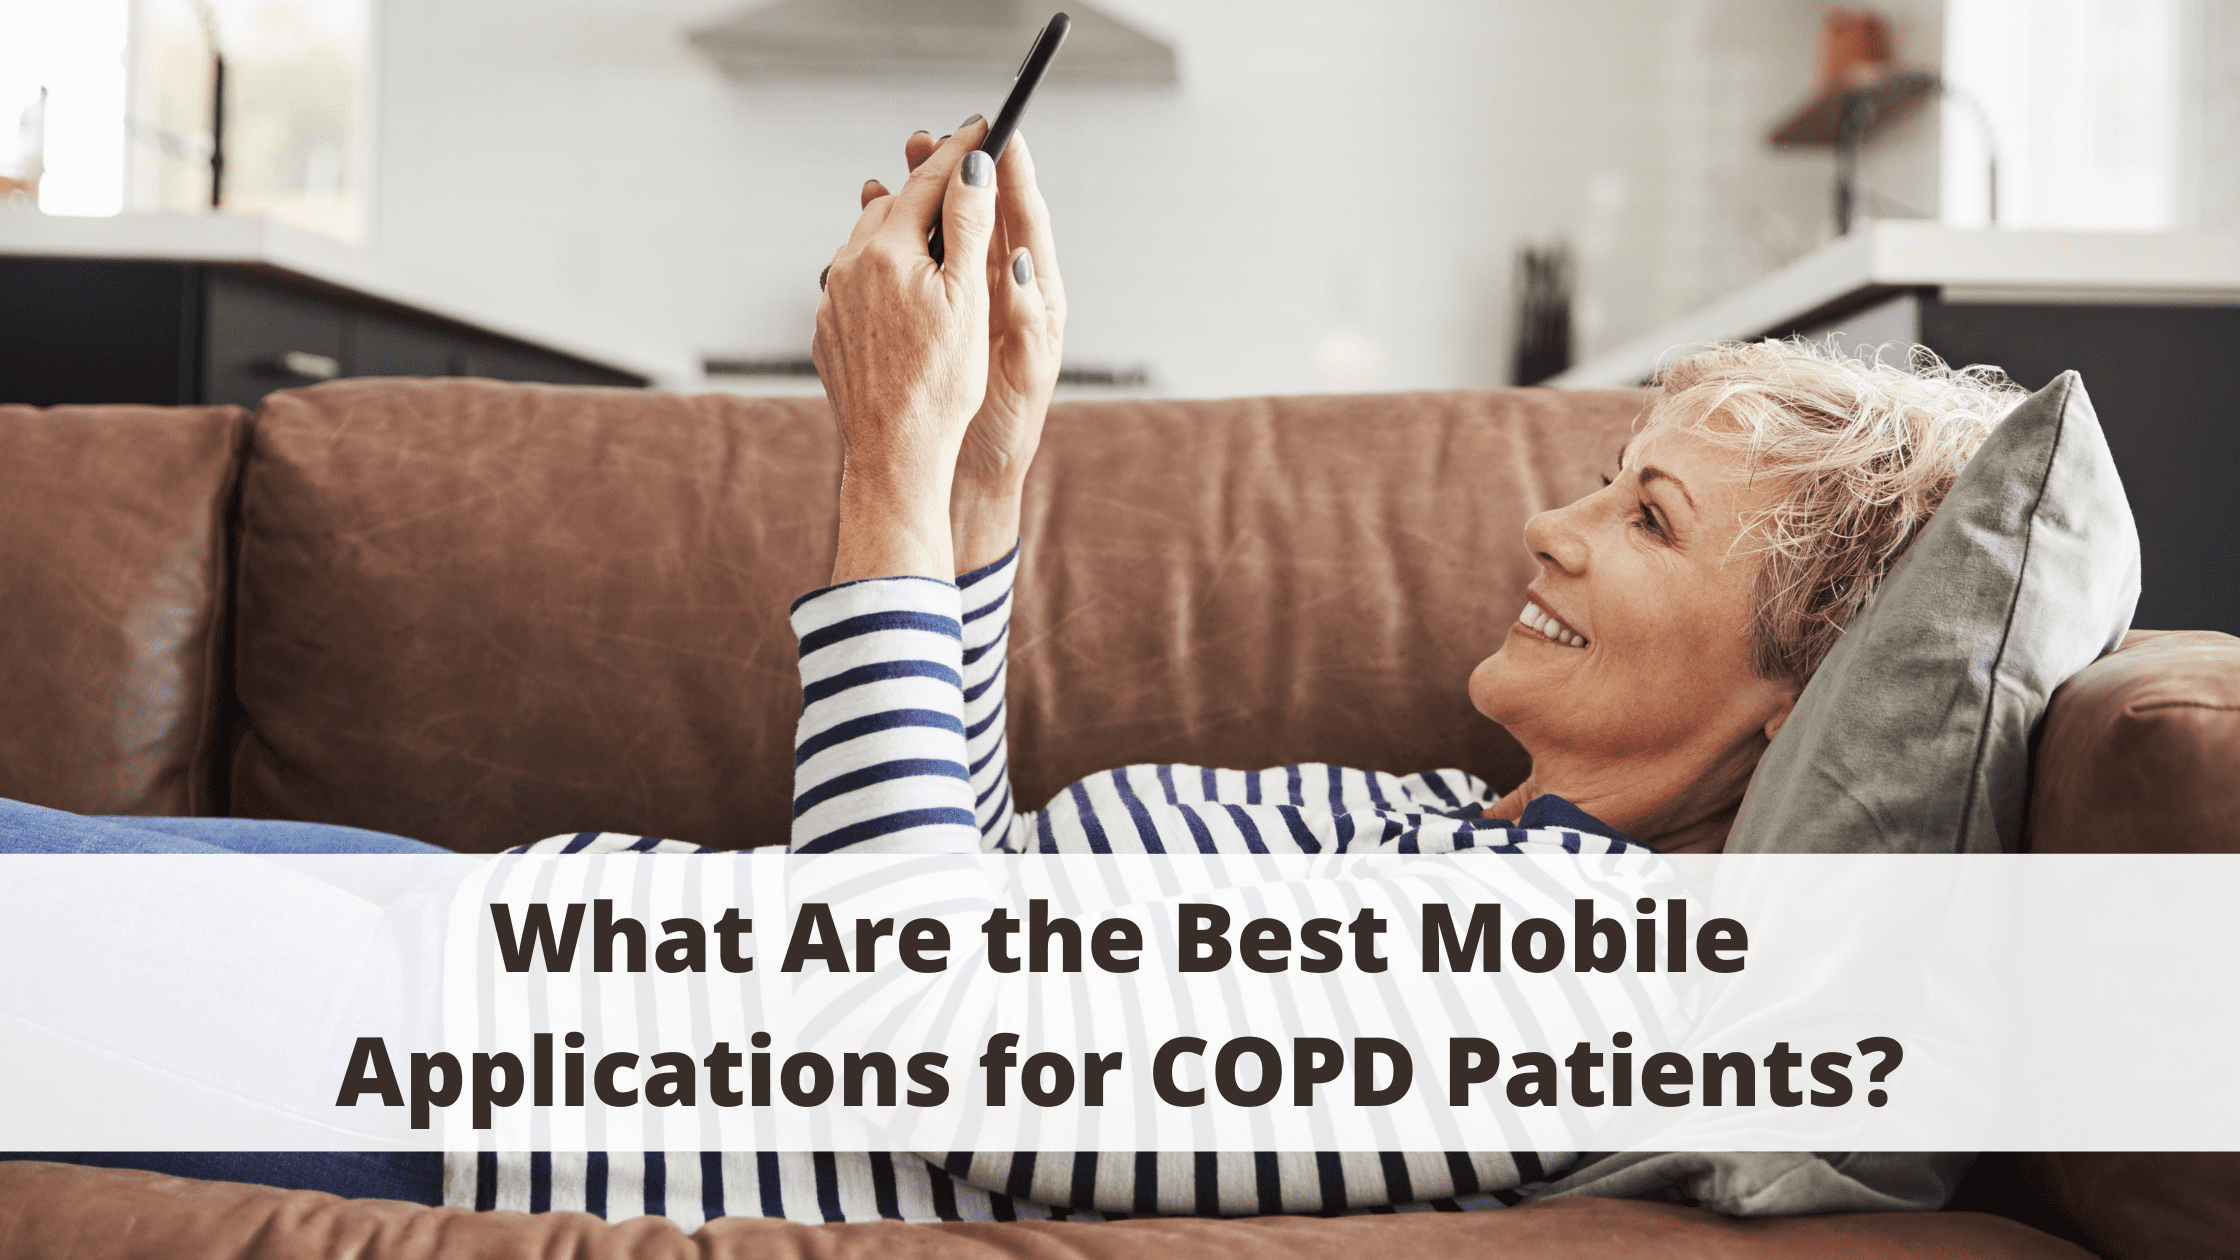 What Are the Best Mobile Applications for COPD Patients?